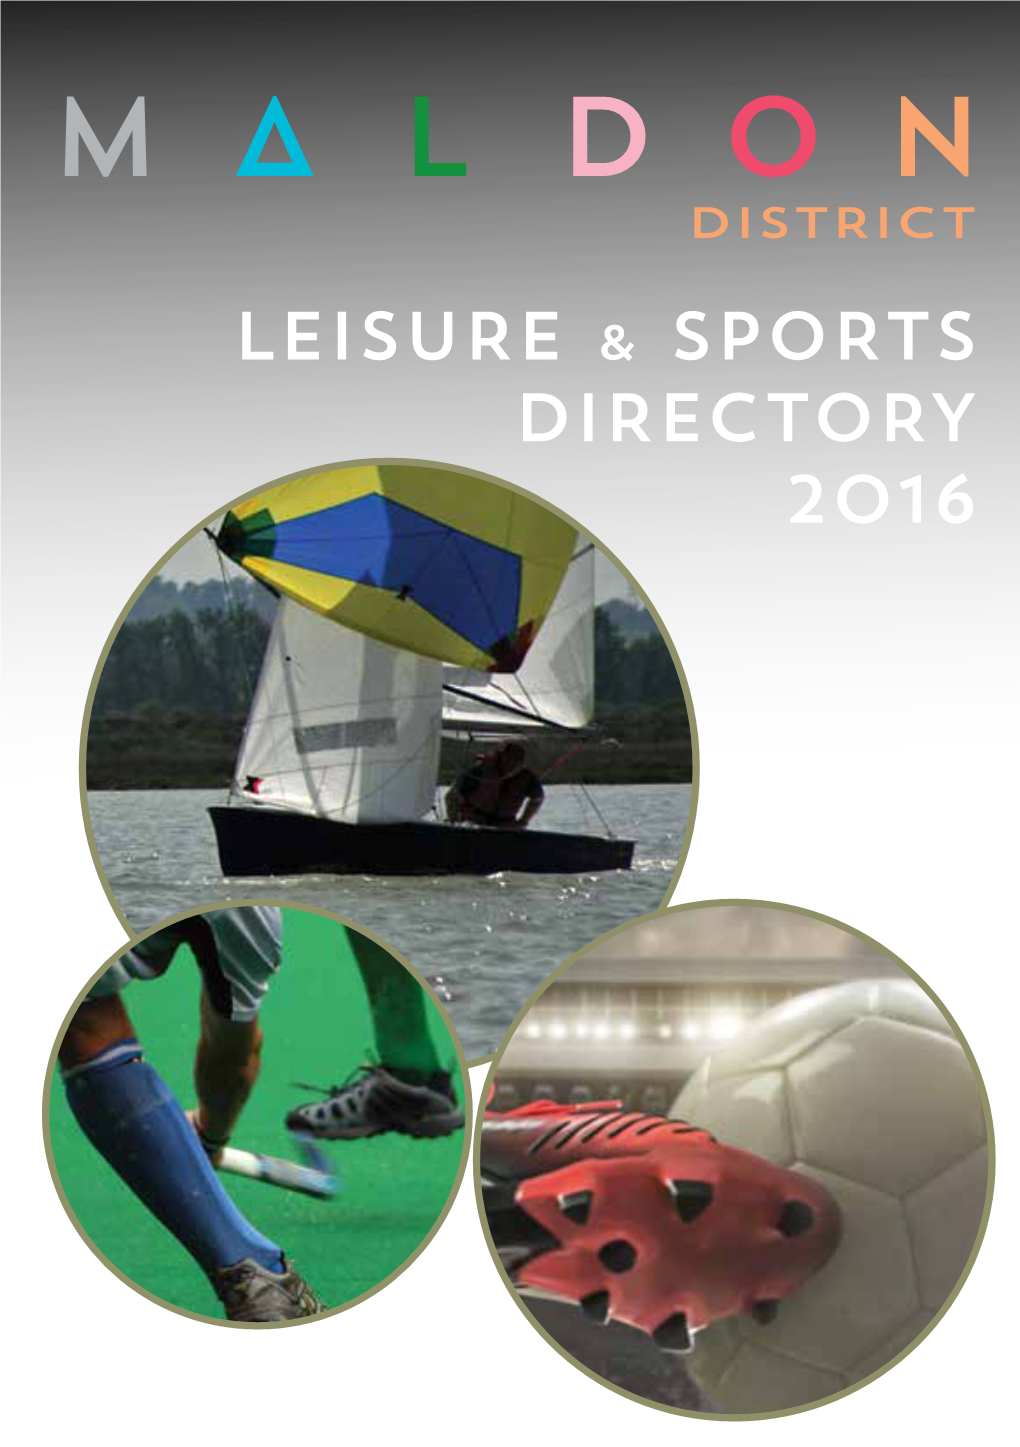 Leisure & Sports Directory 2016